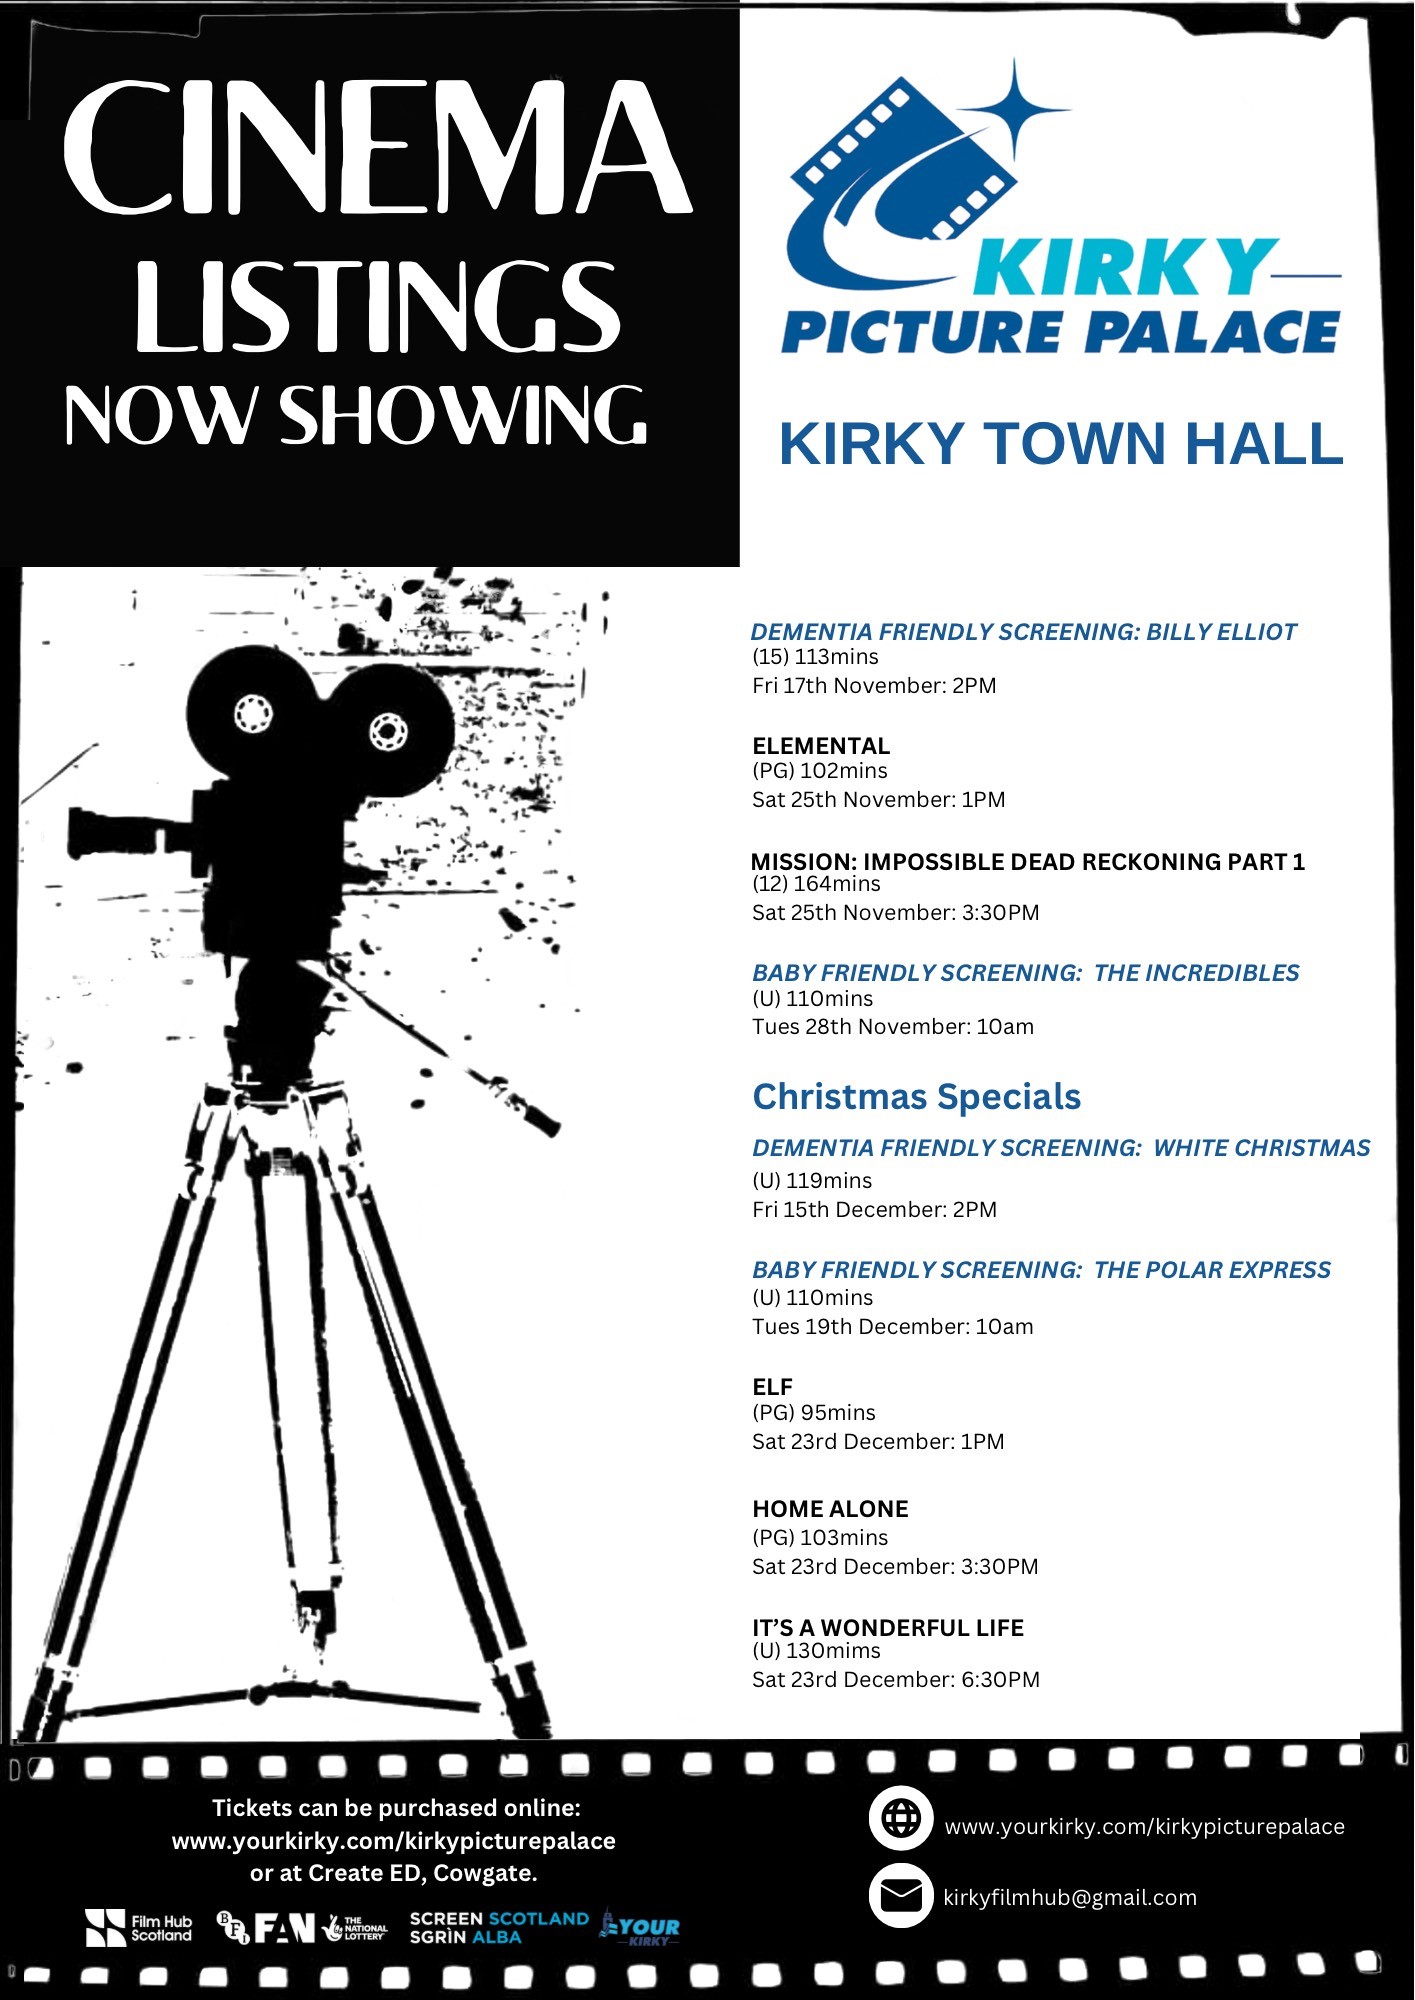 Poster for Kirky Picture Palace - see article for details